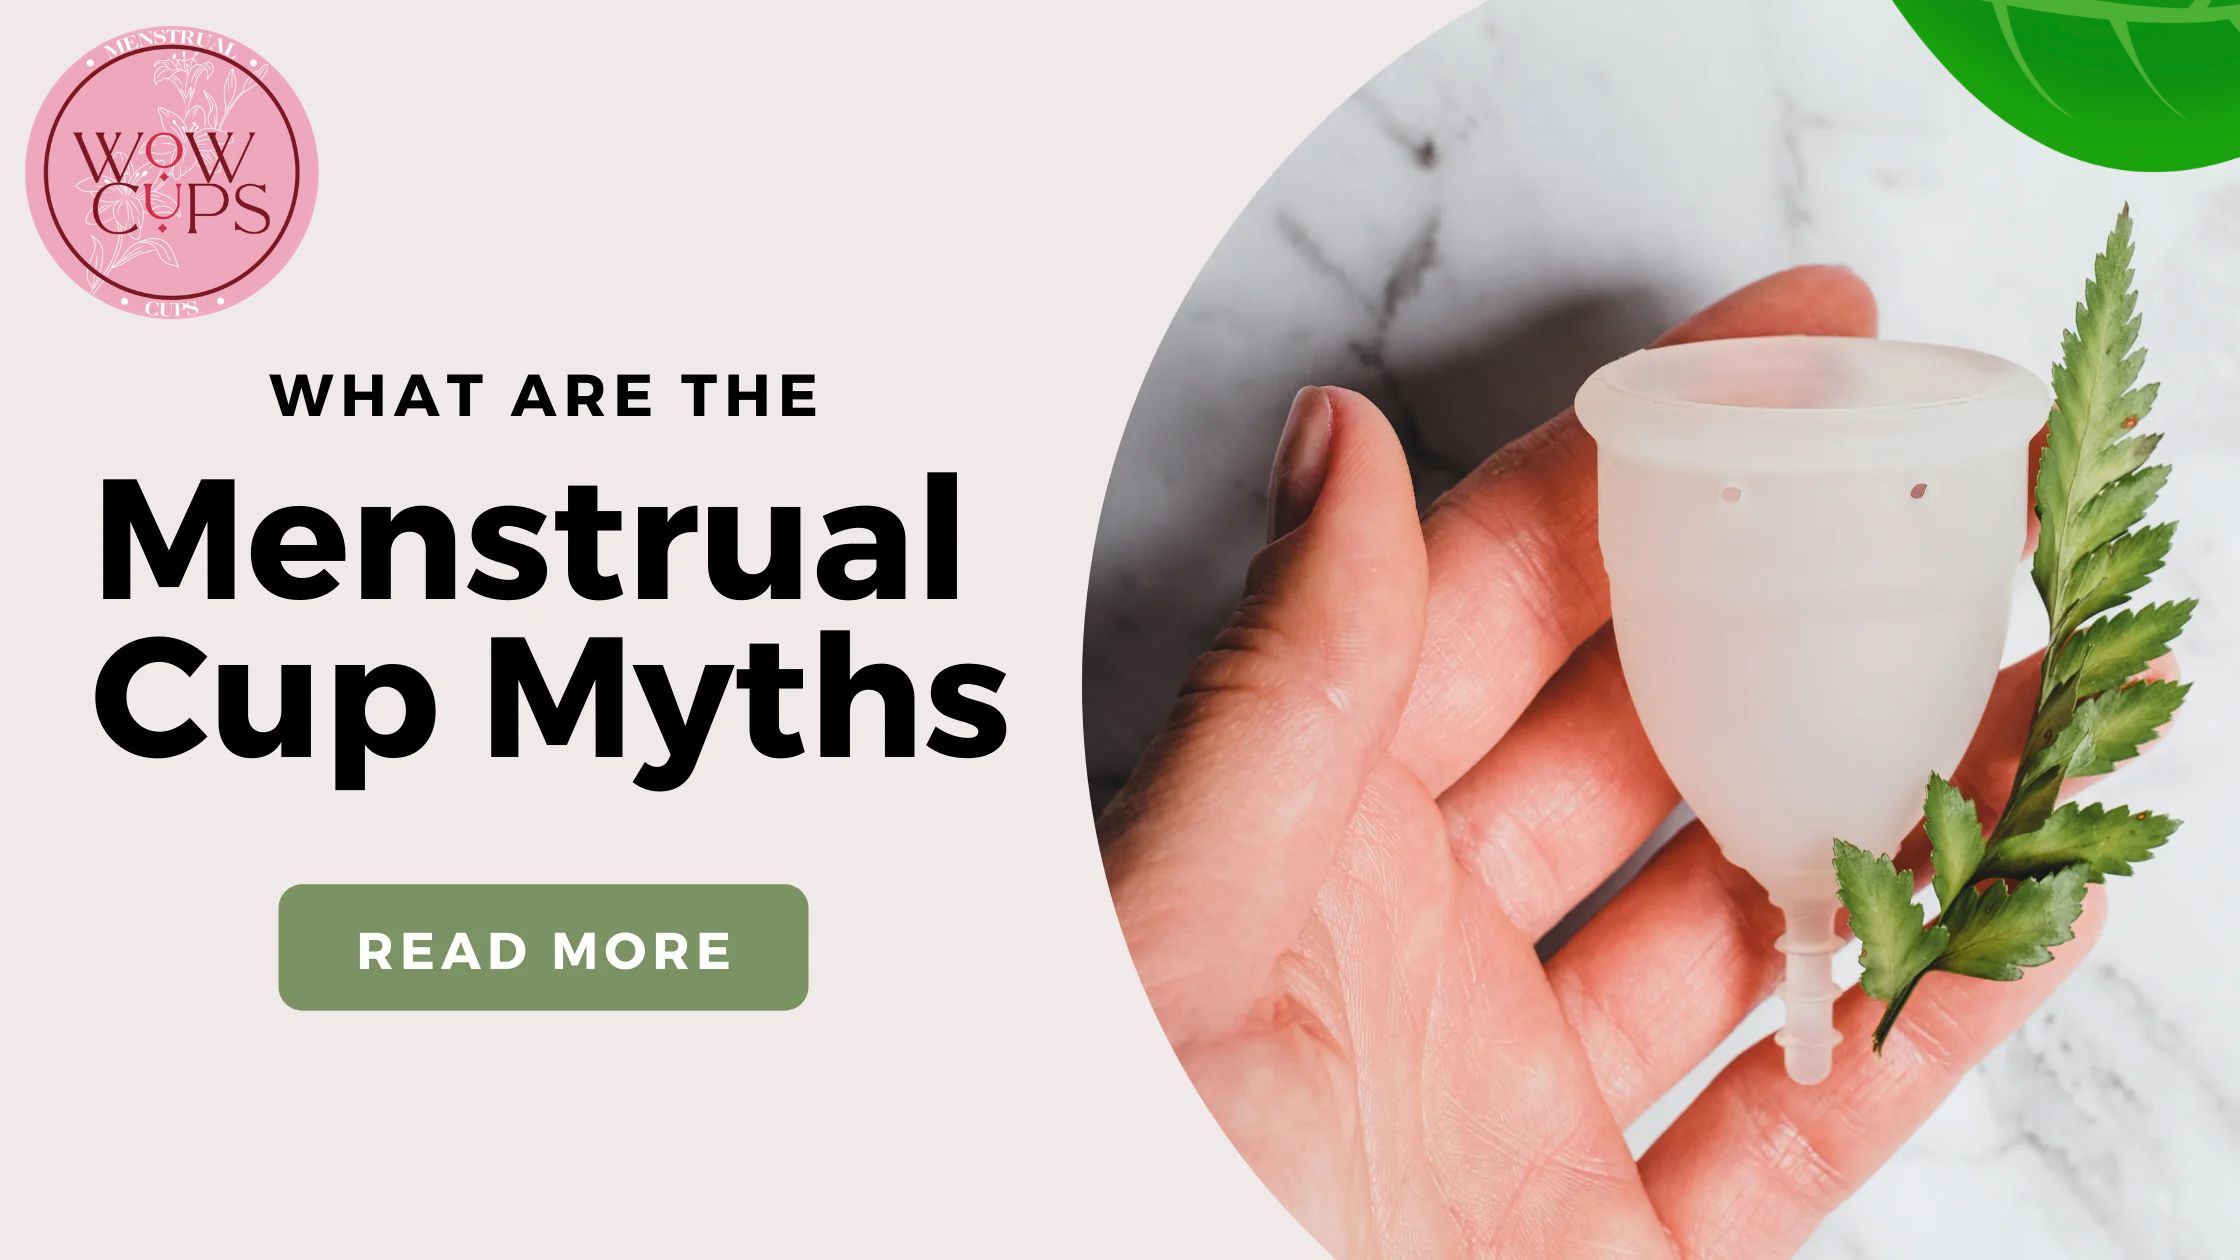 Debunking Common Menstrual Cups Myths with Facts